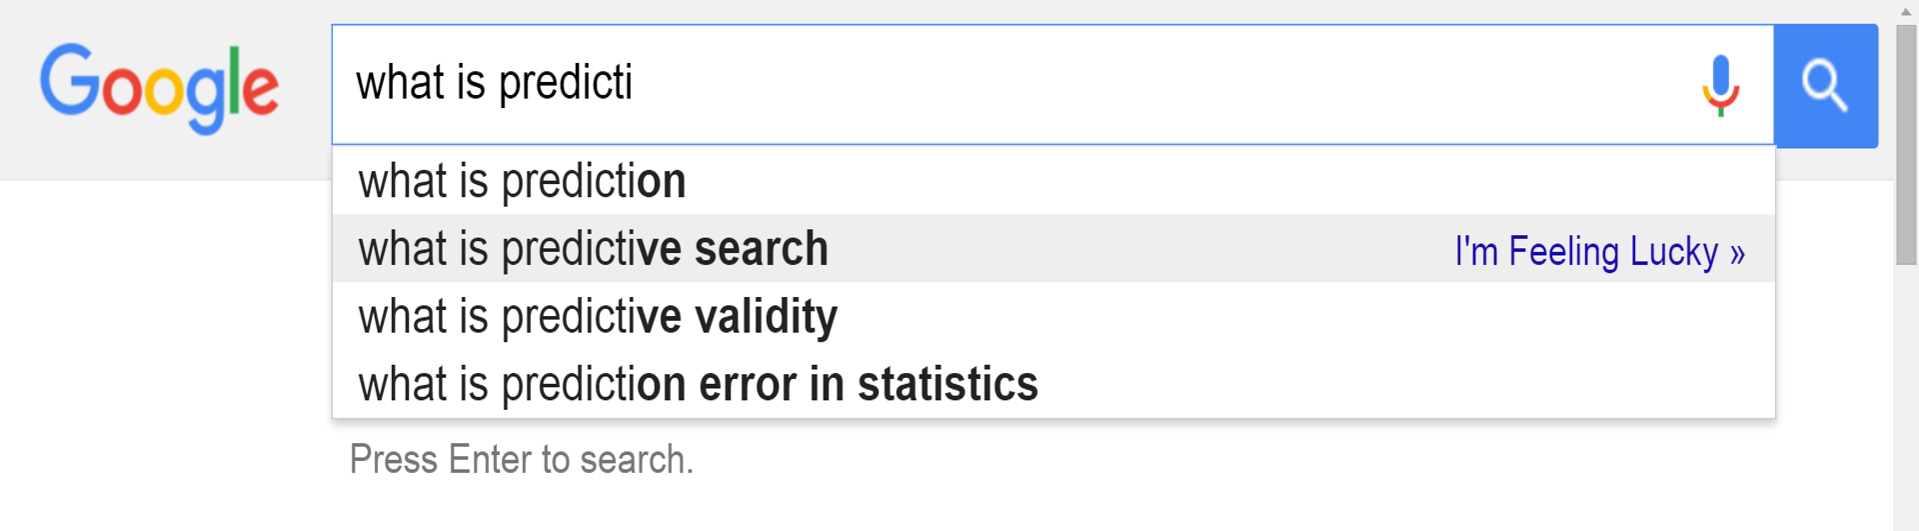 What is Predictive Search?